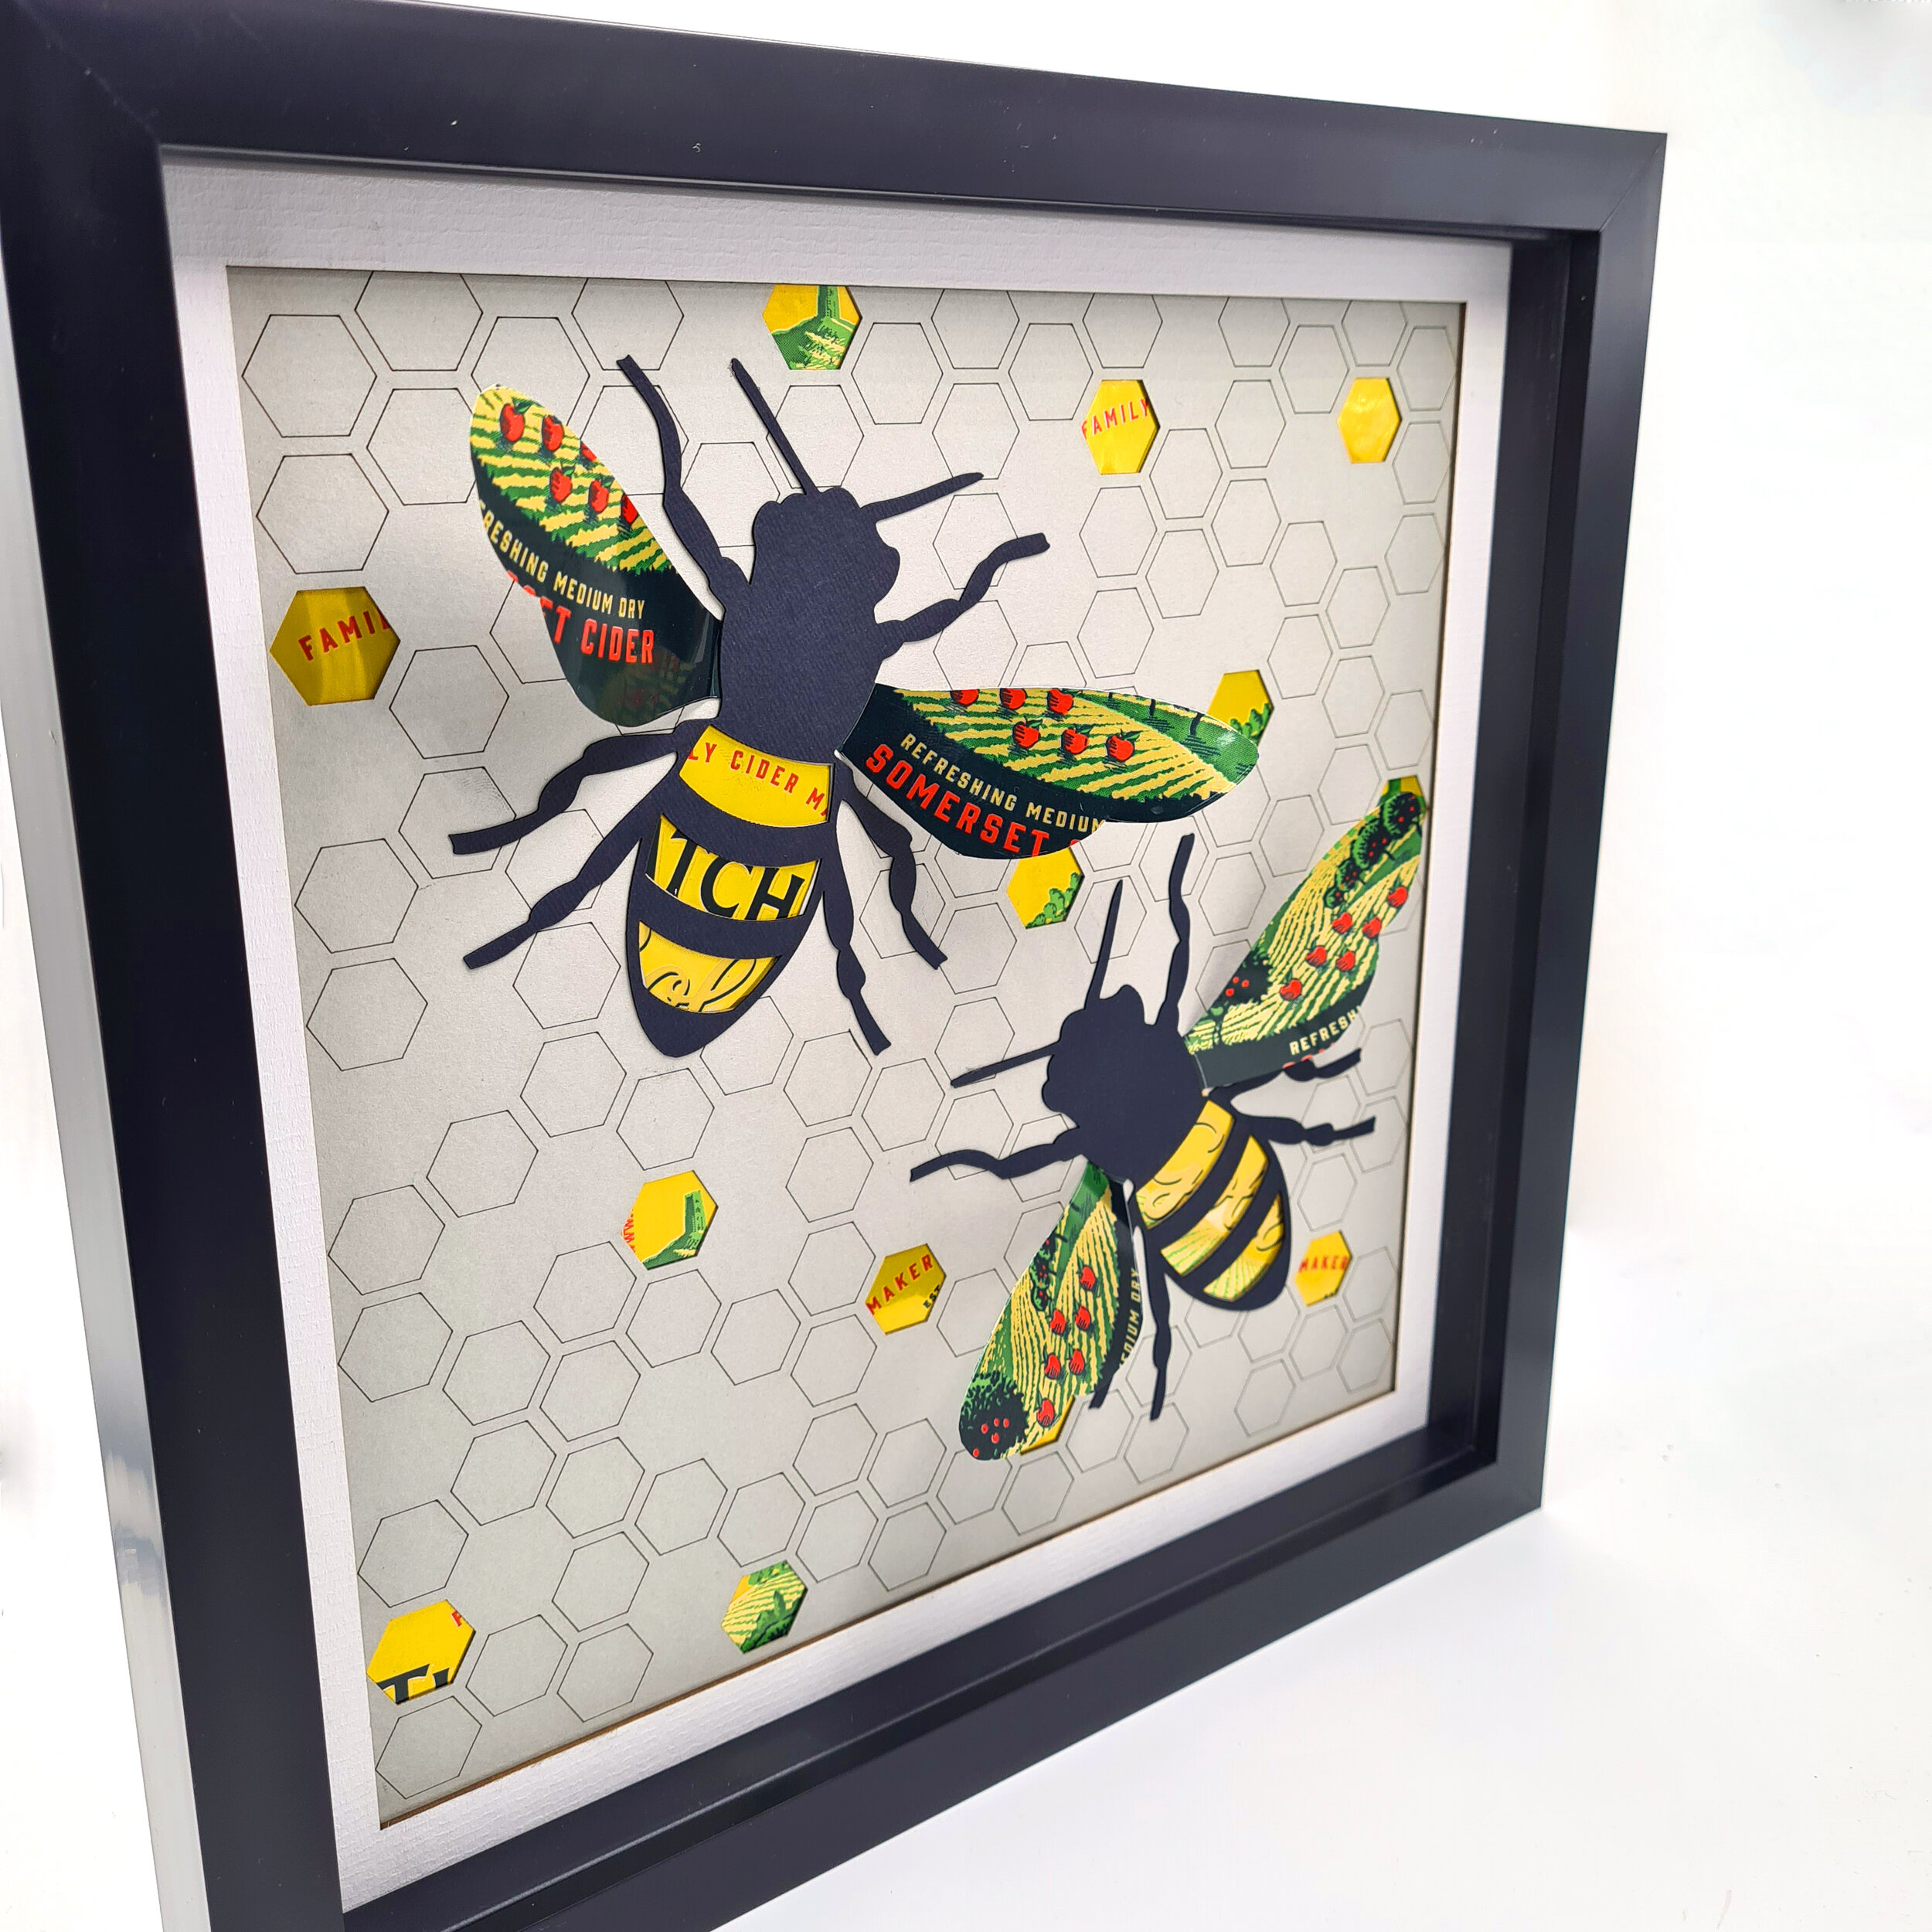 Repurposed cider cans upcycled into a bee artwork